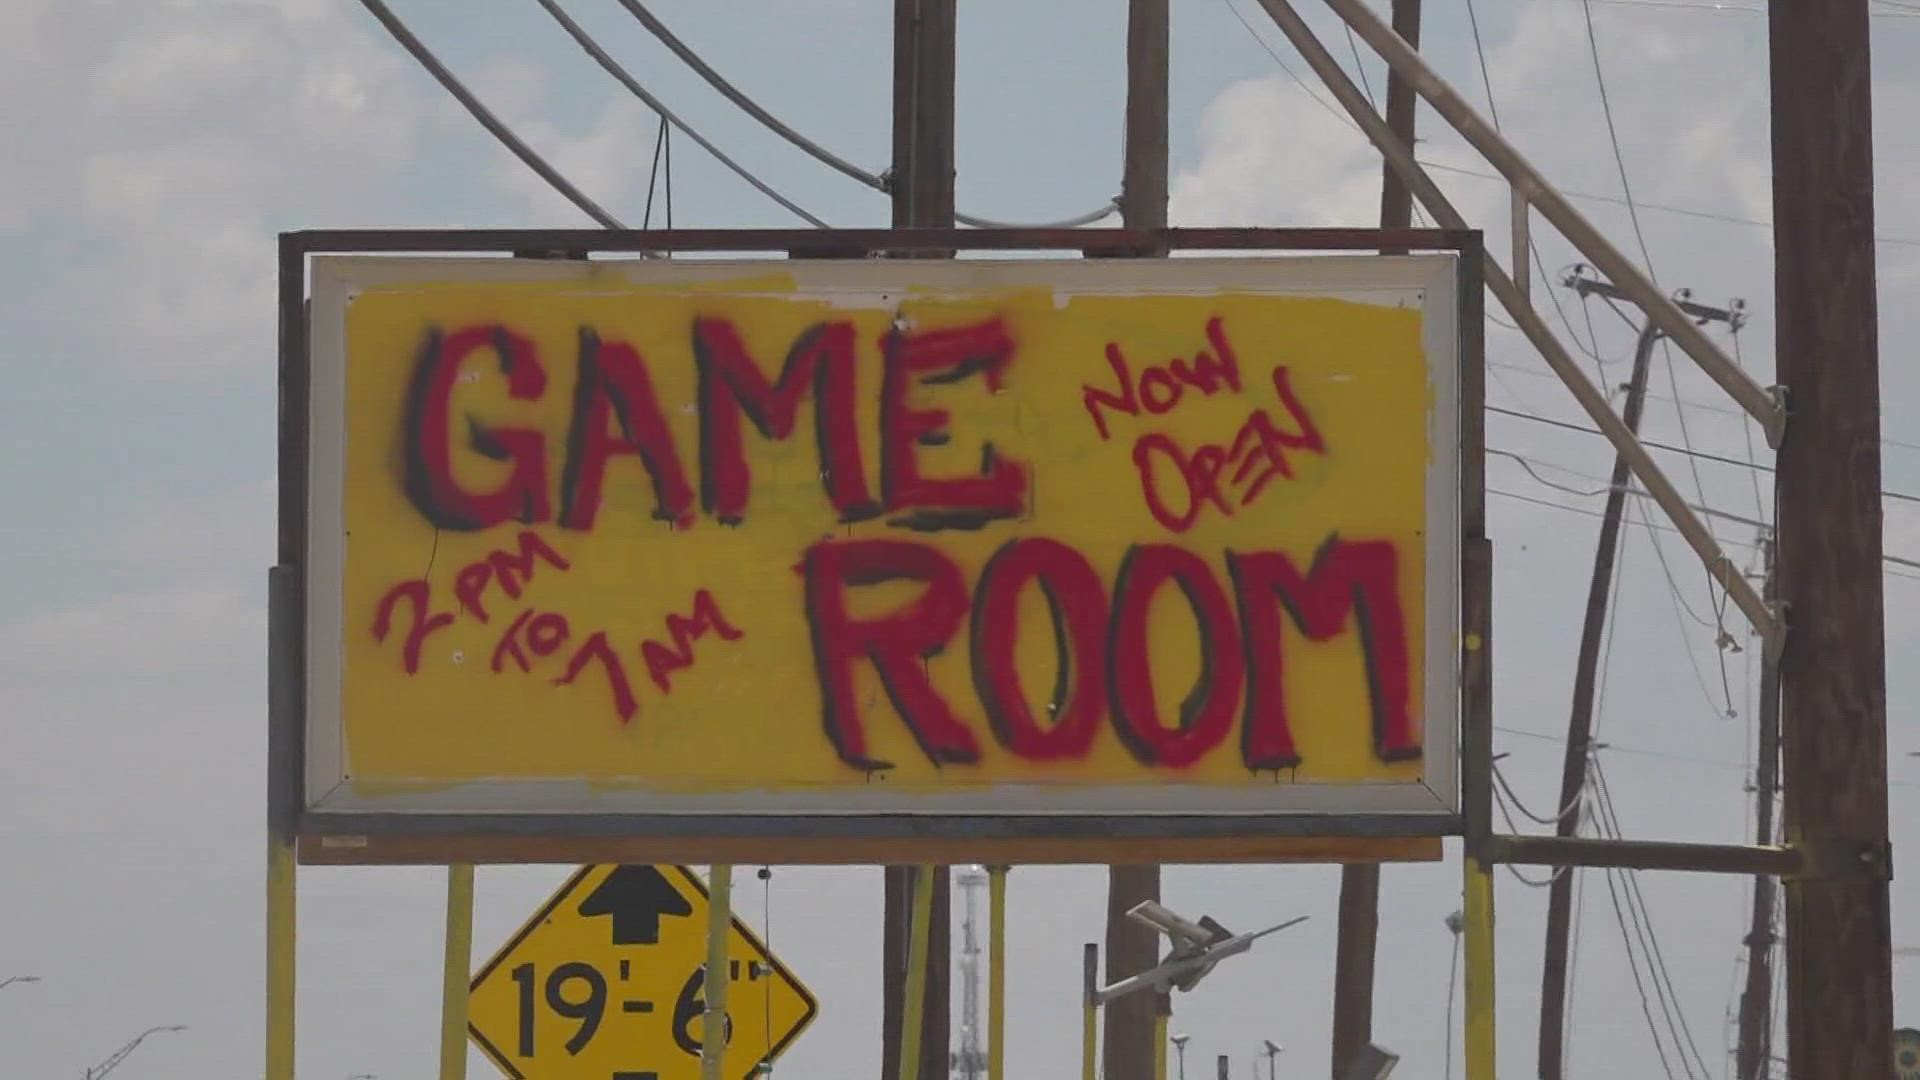 An attorney for several game rooms argued that OPD wasn't enforcing the rules in the game room ordinance consistently.